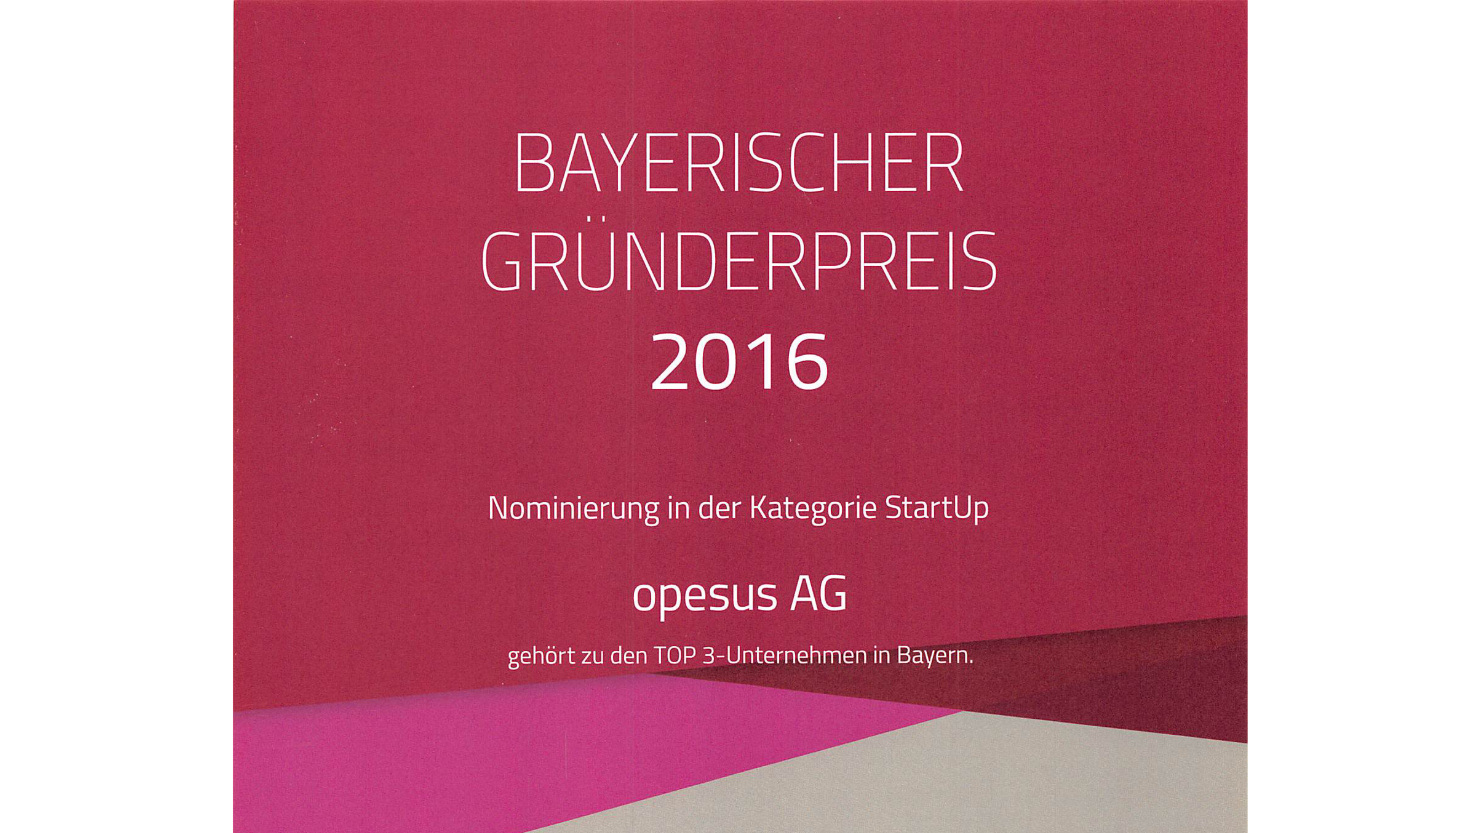 opesus is one of three finalists in the Bavarian Founders Prize 2016 category startup